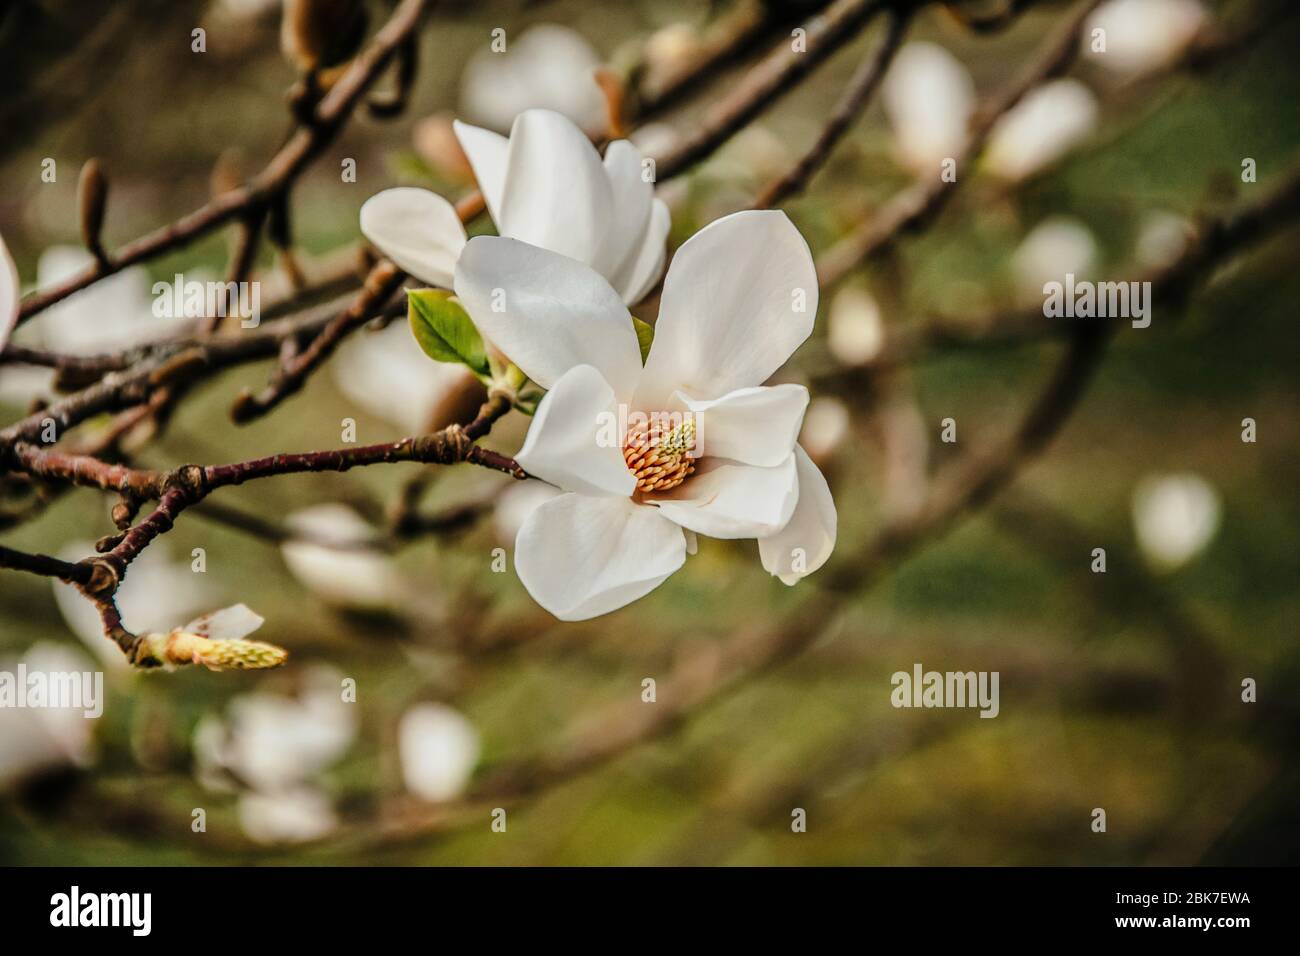 Kobus Magnolia tree blooming with white flowers in early spring Stock Photo